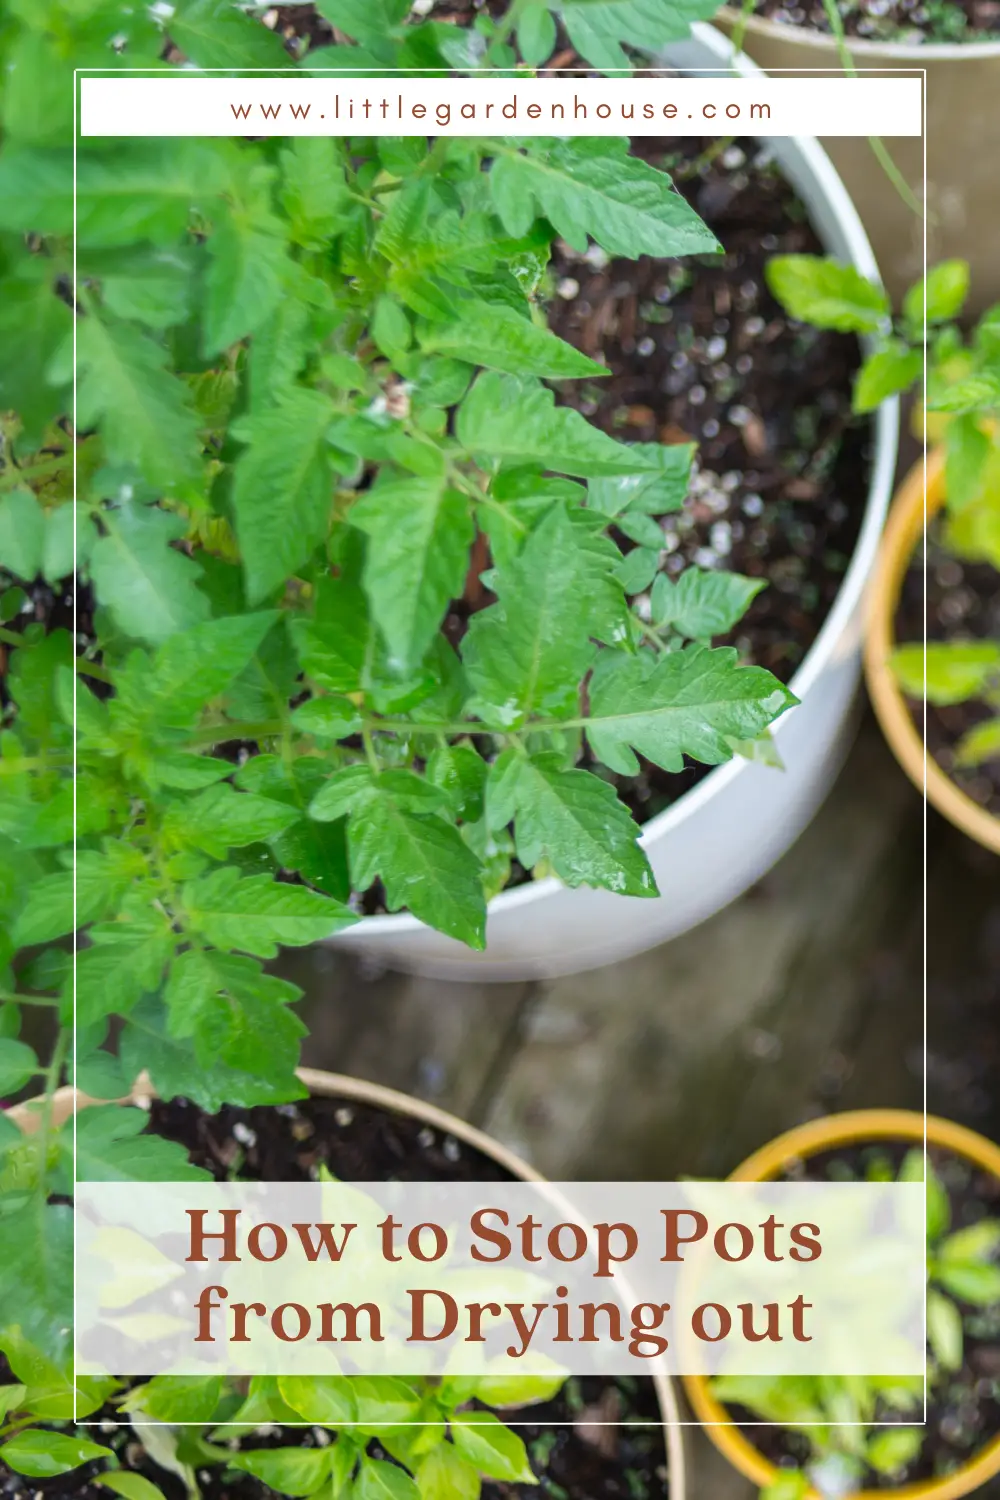 How to Stop Pots from Drying Out